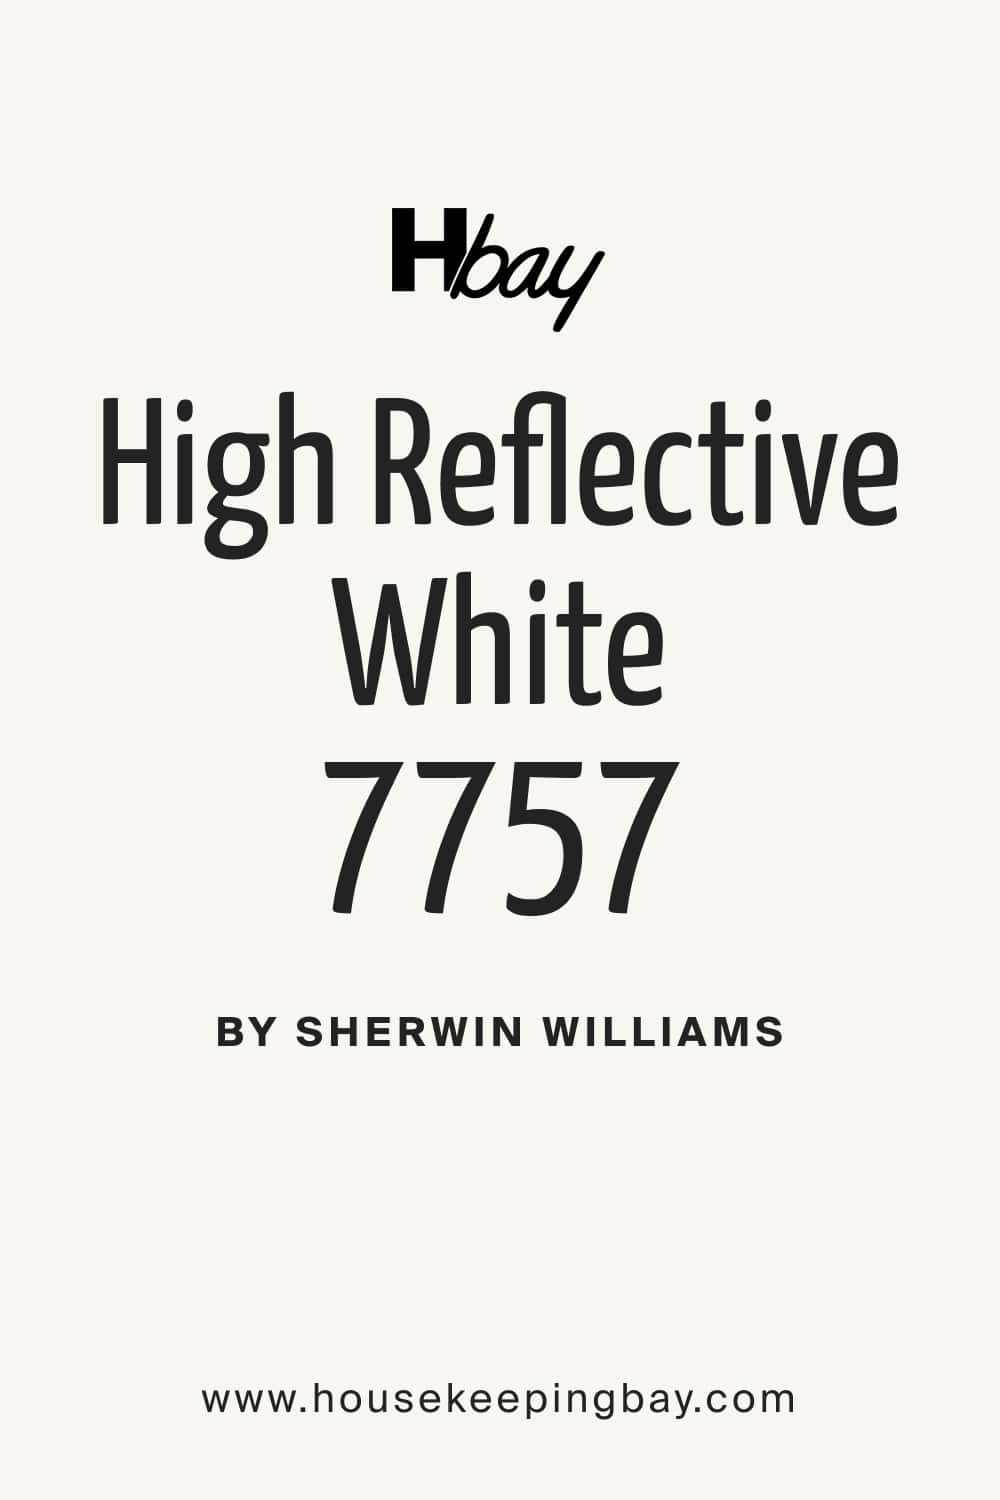 High Reflective White SW 7757 by Sherwin Williams